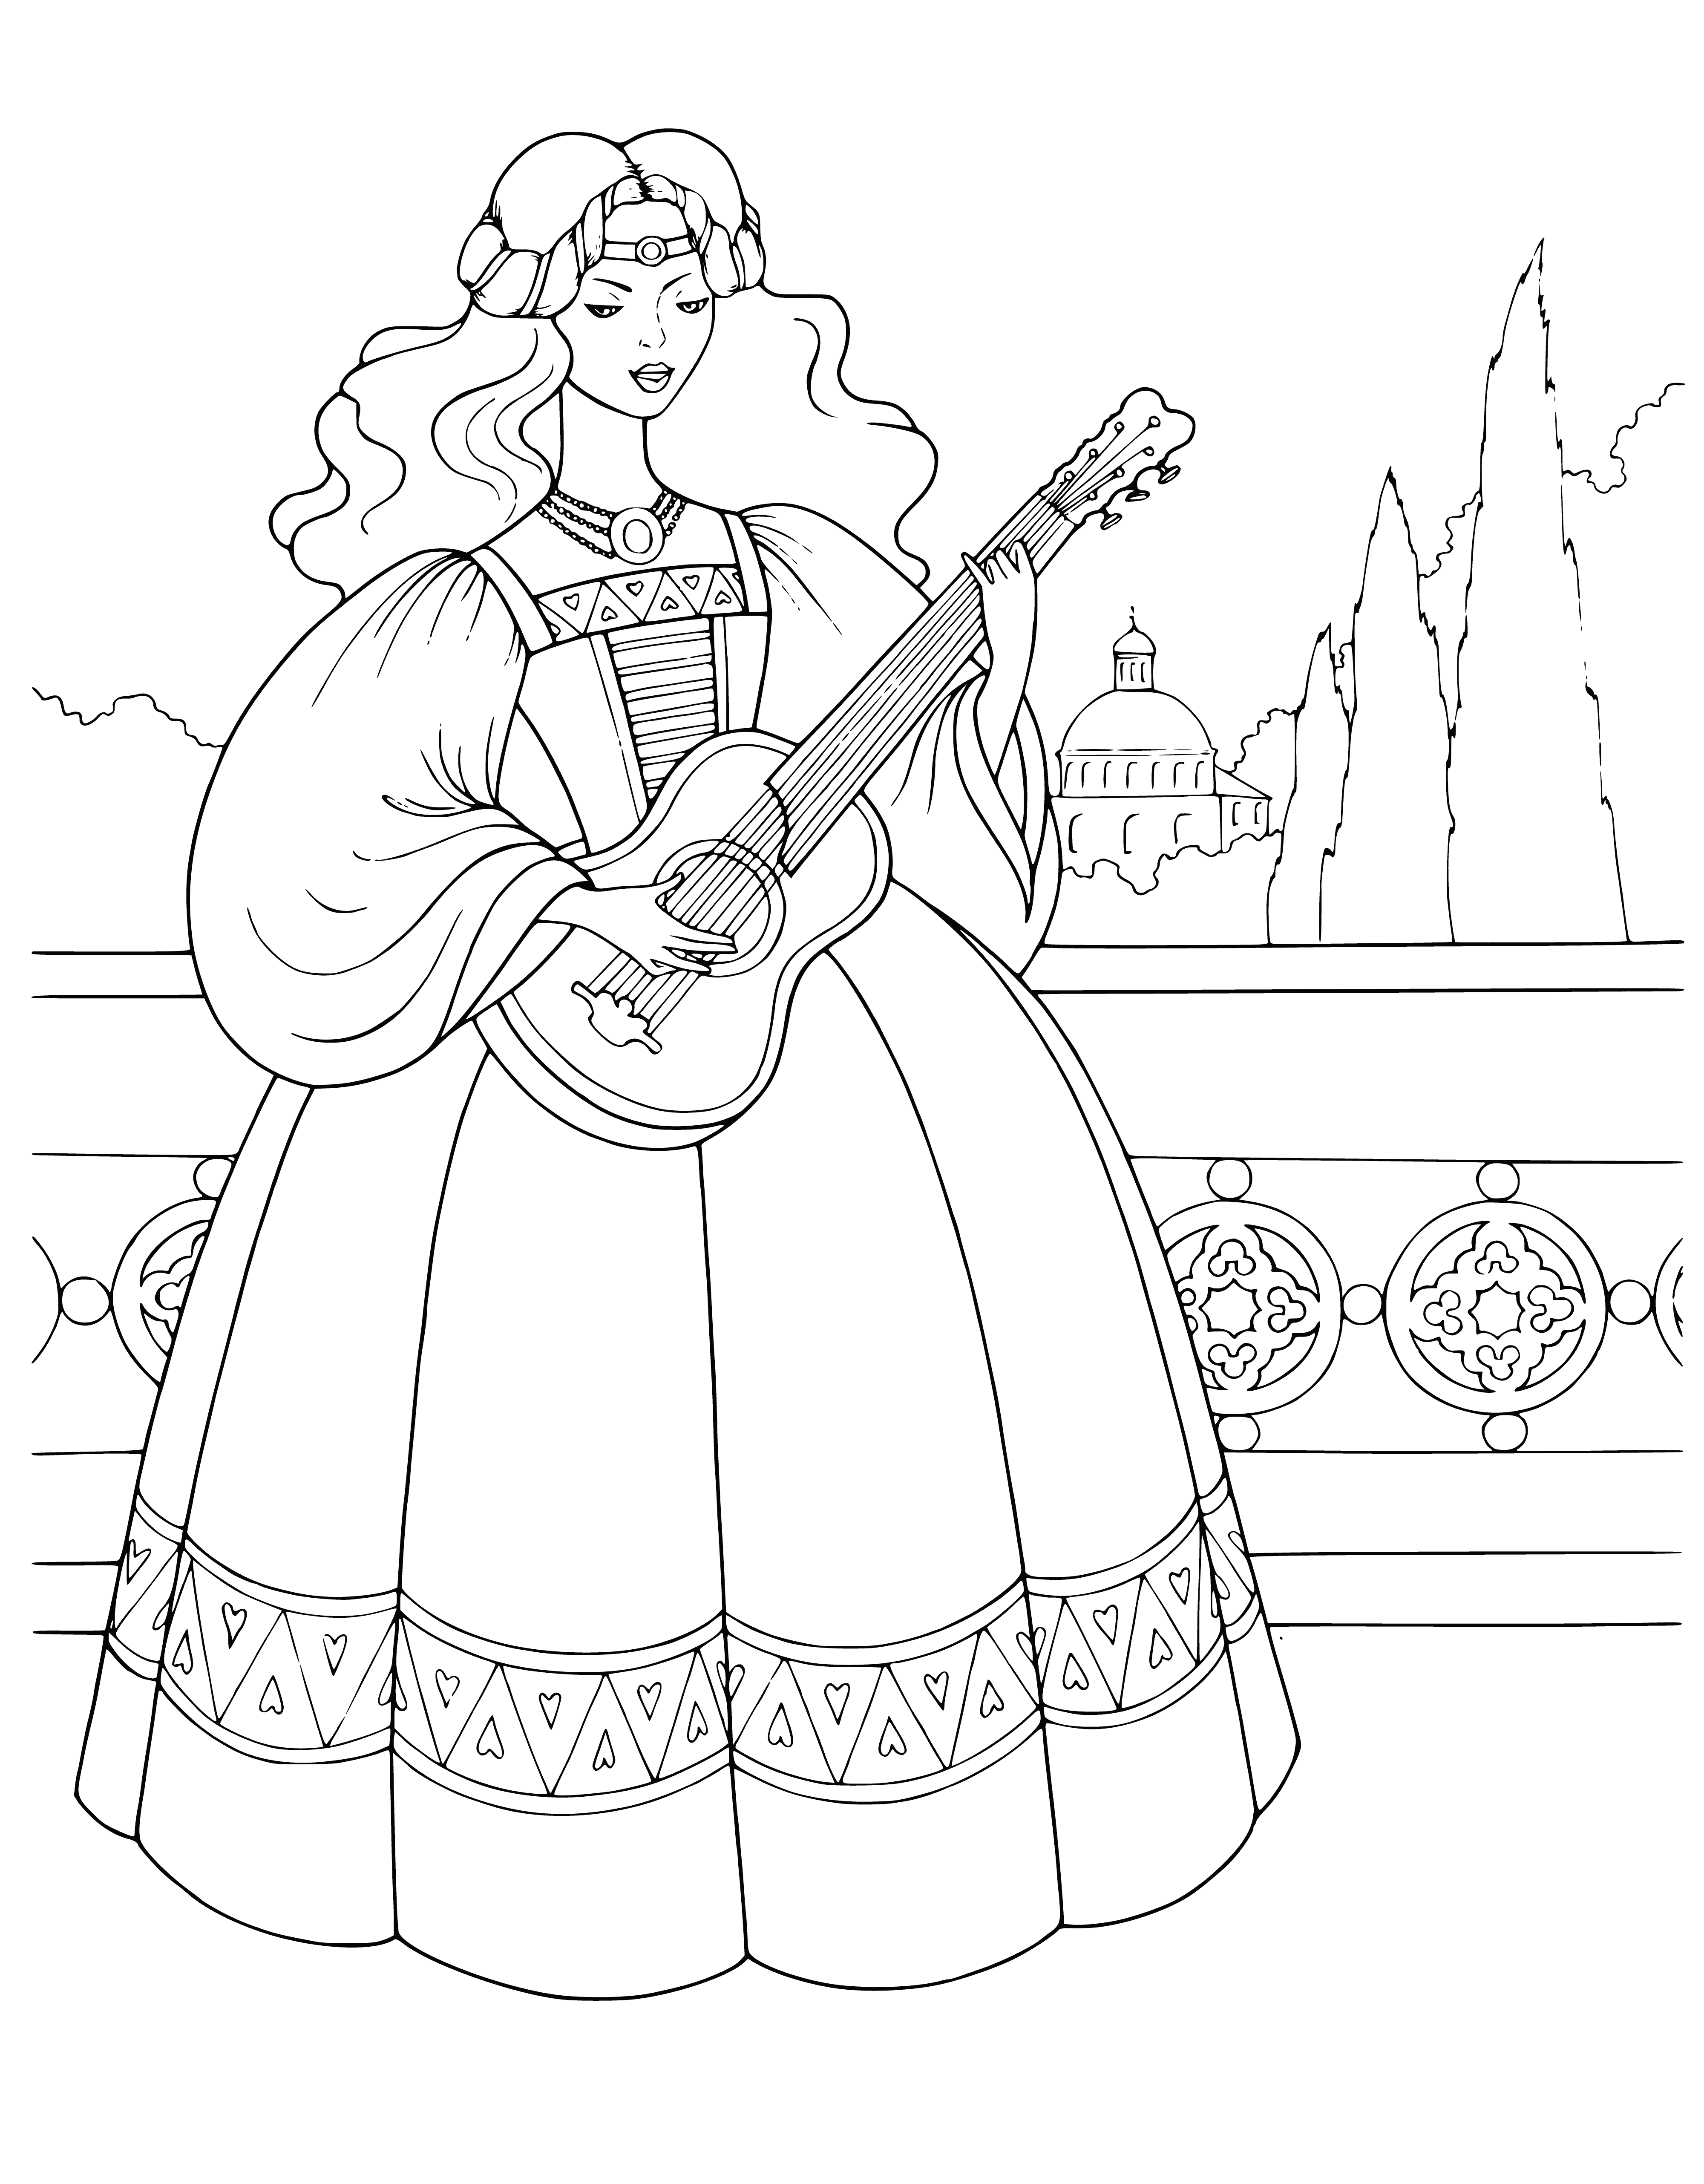 Princess with a guitar coloring page